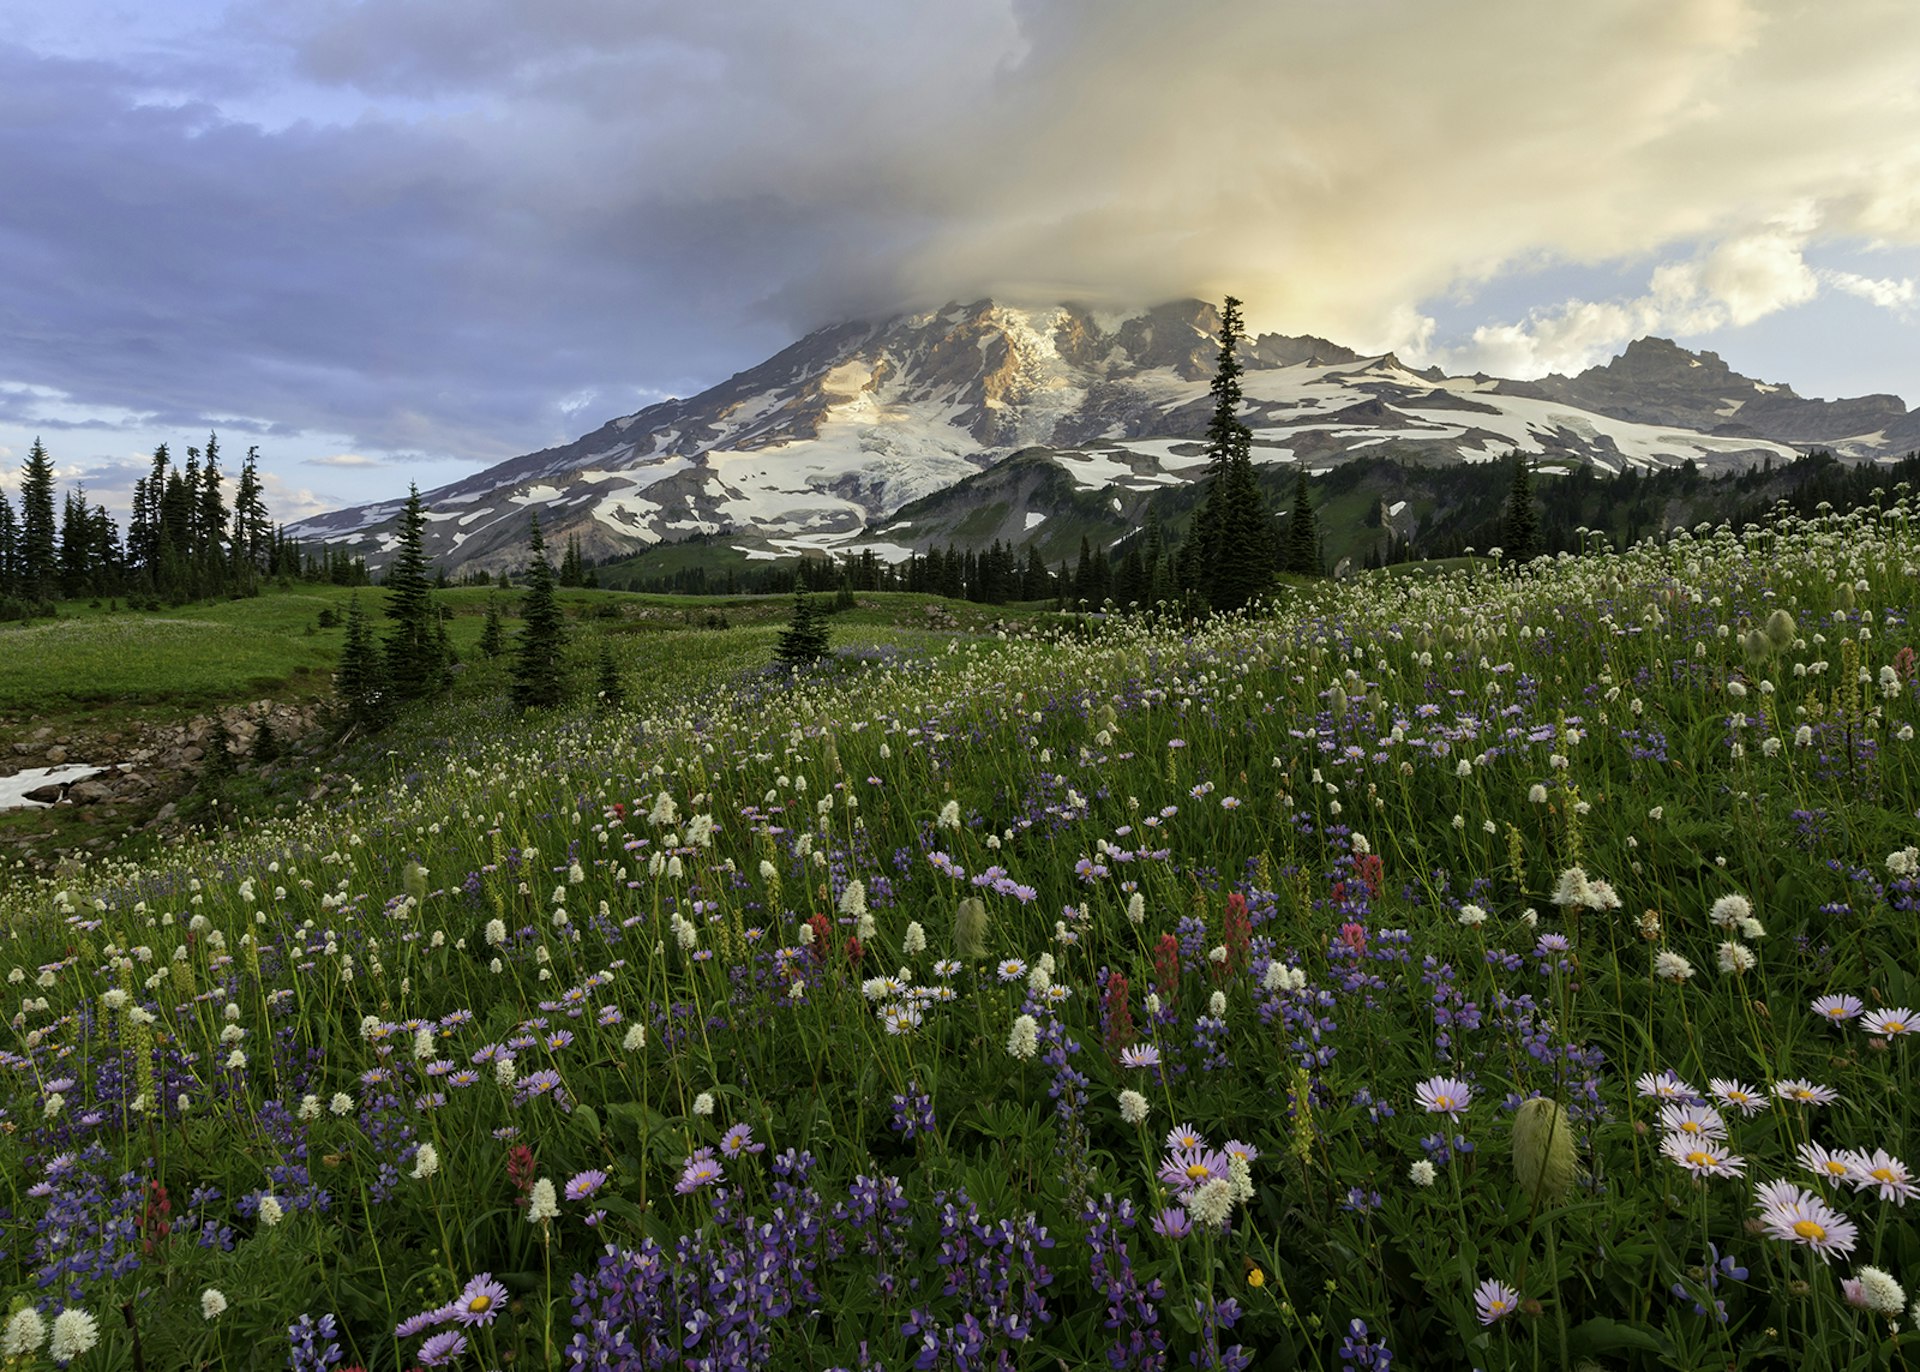 Field of wildflowers with Mt Rainer in background